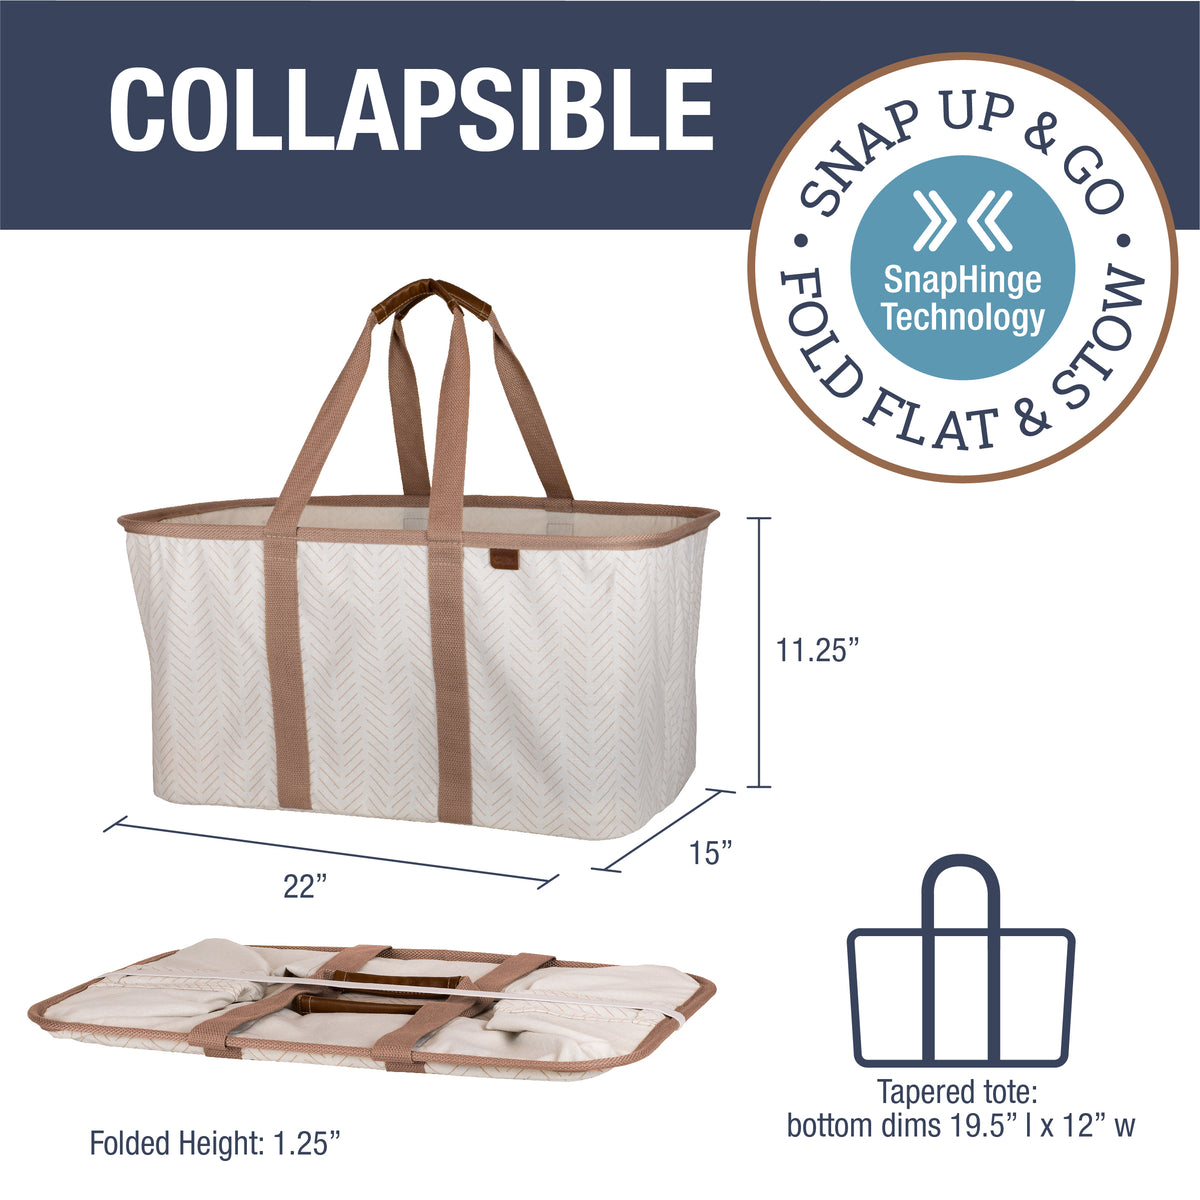 Collapsible LUXE Tote - CleverMade